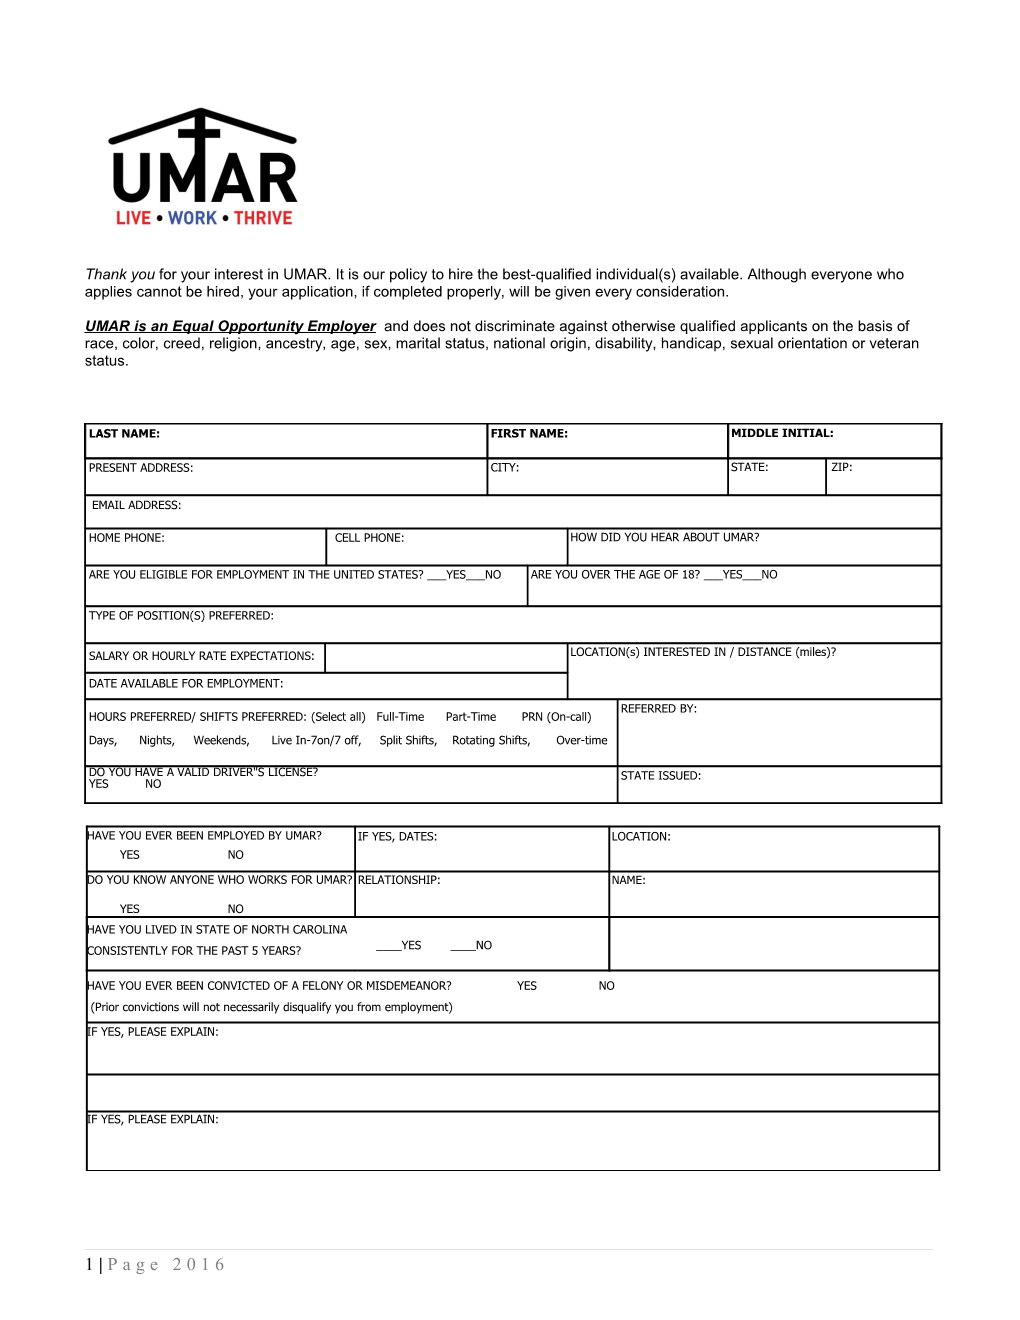 Thank You for Your Interest in UMAR. It Is Our Policy to Hire the Best-Qualified Individual(S)